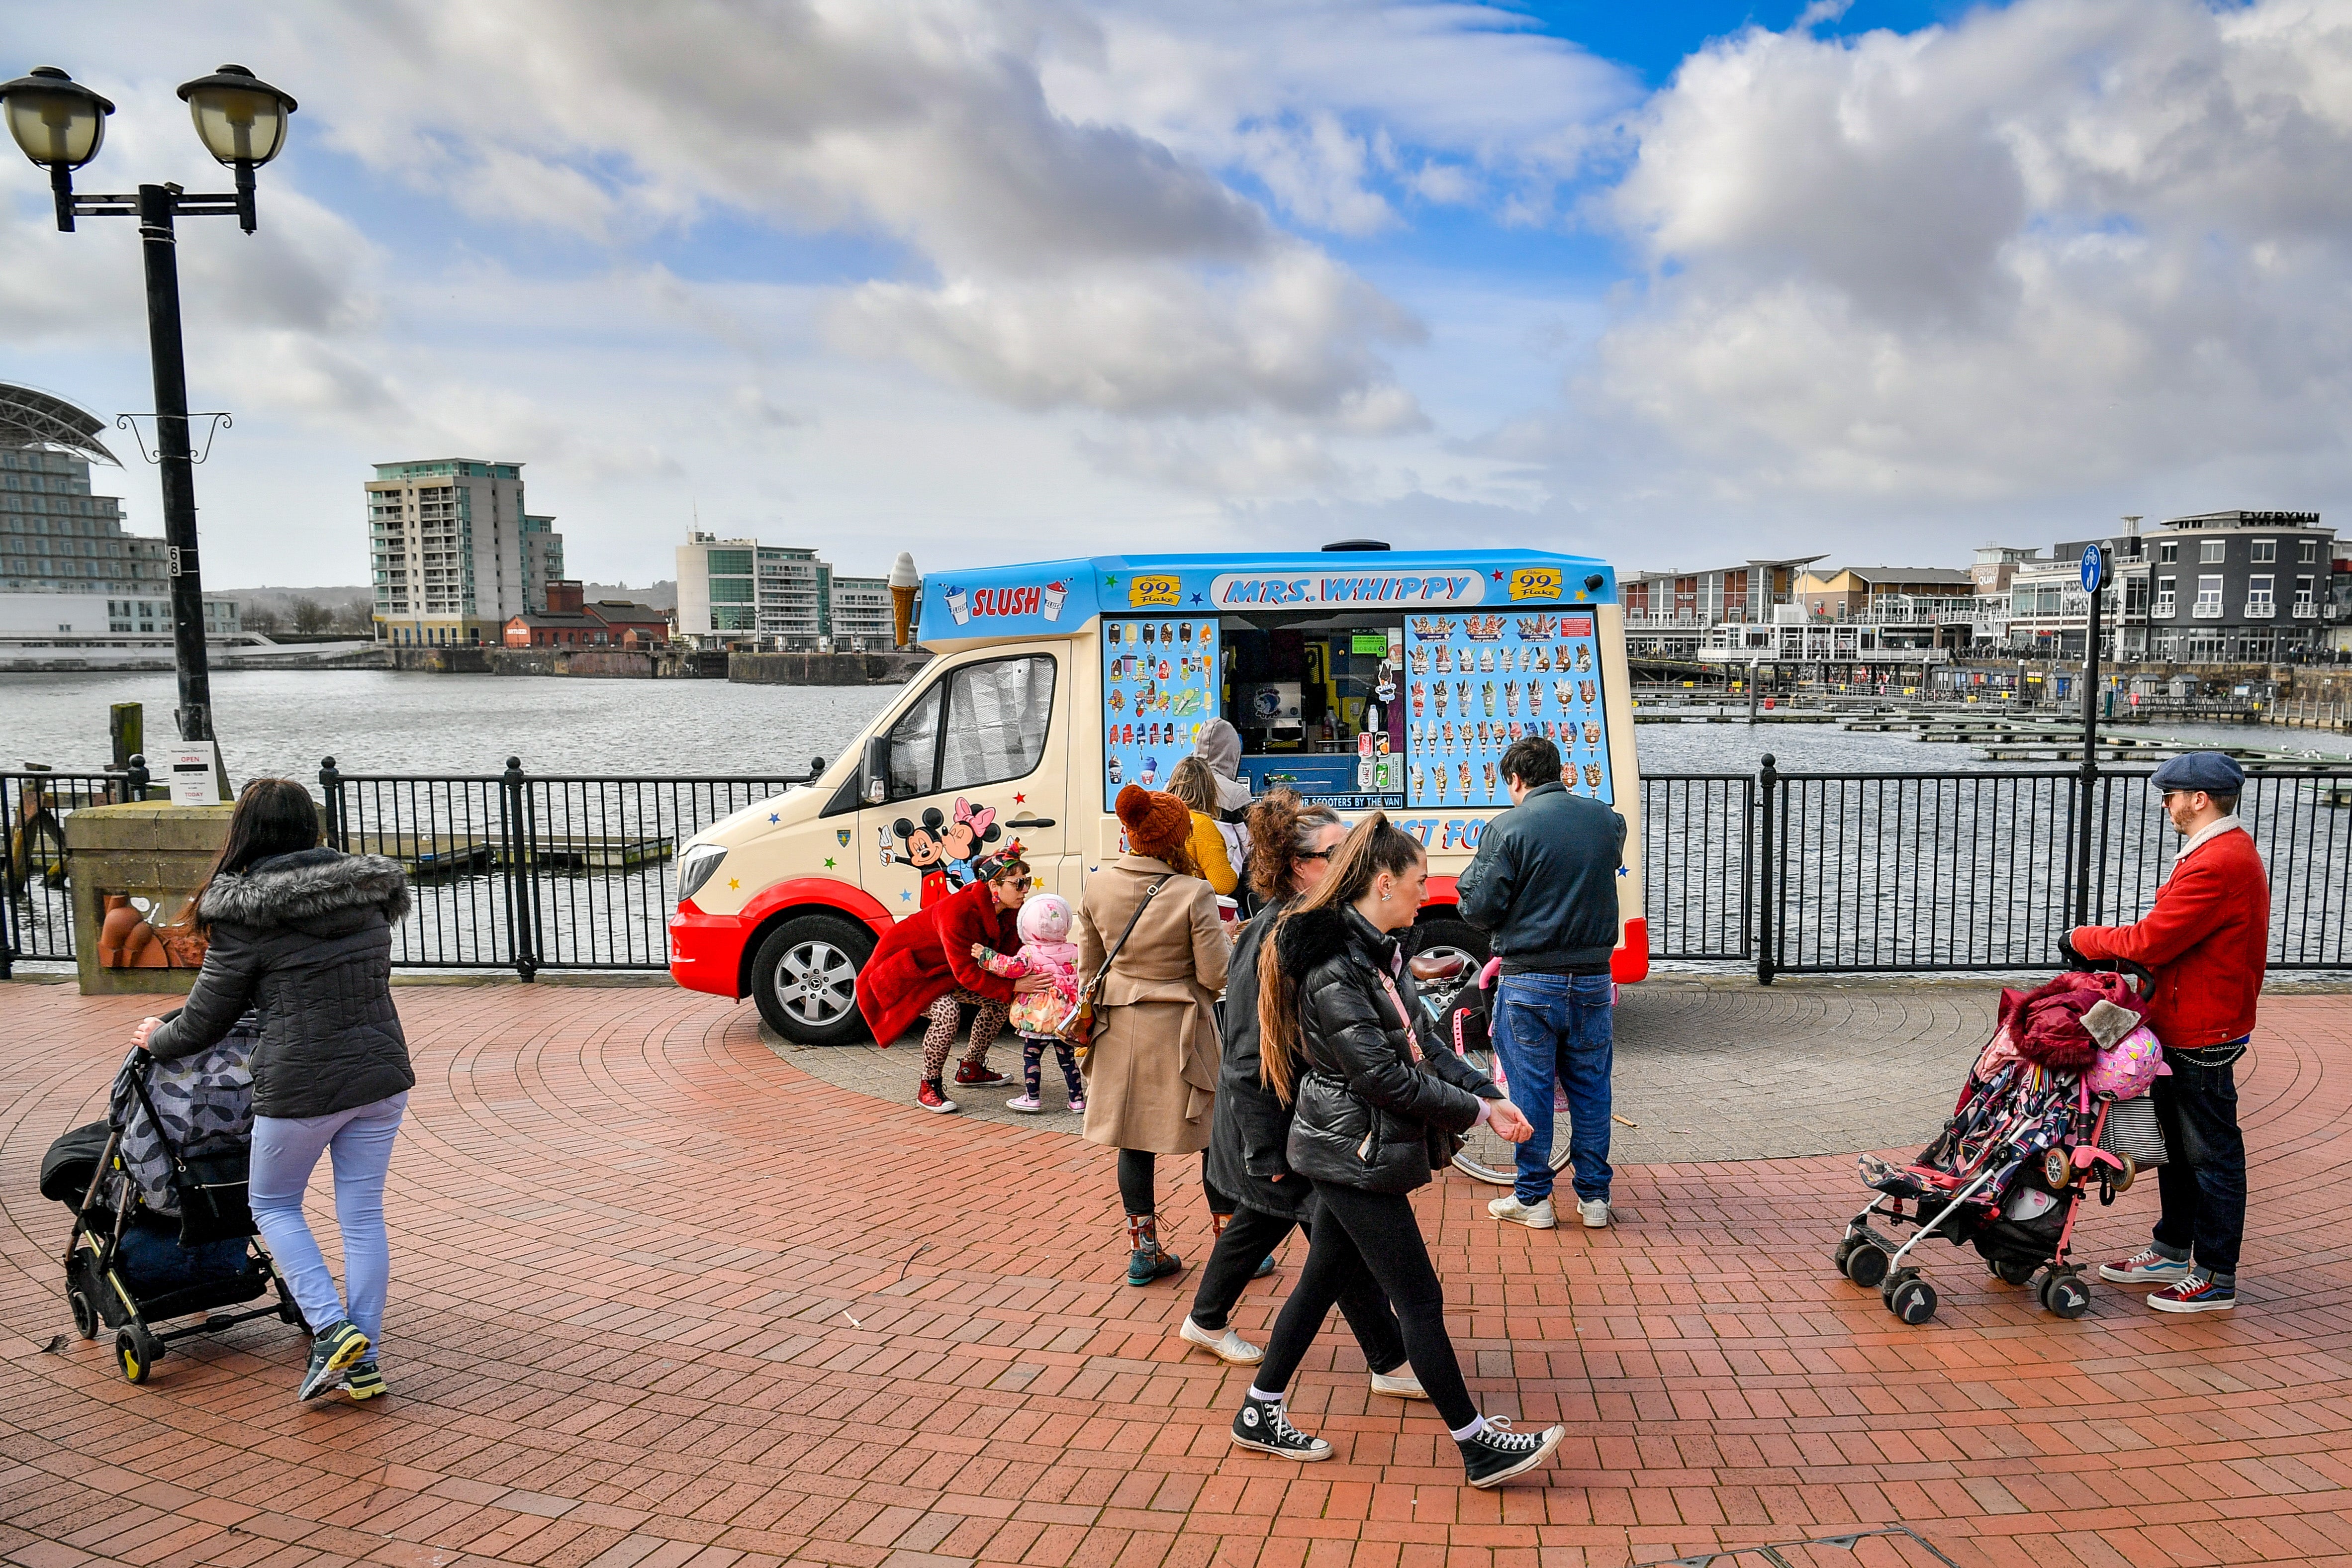 People queue for an ice-cream van in Cardiff Bay, with stay-at-home restrictions eased and people permitted to travel within their local area (Ben Birchall/PA)